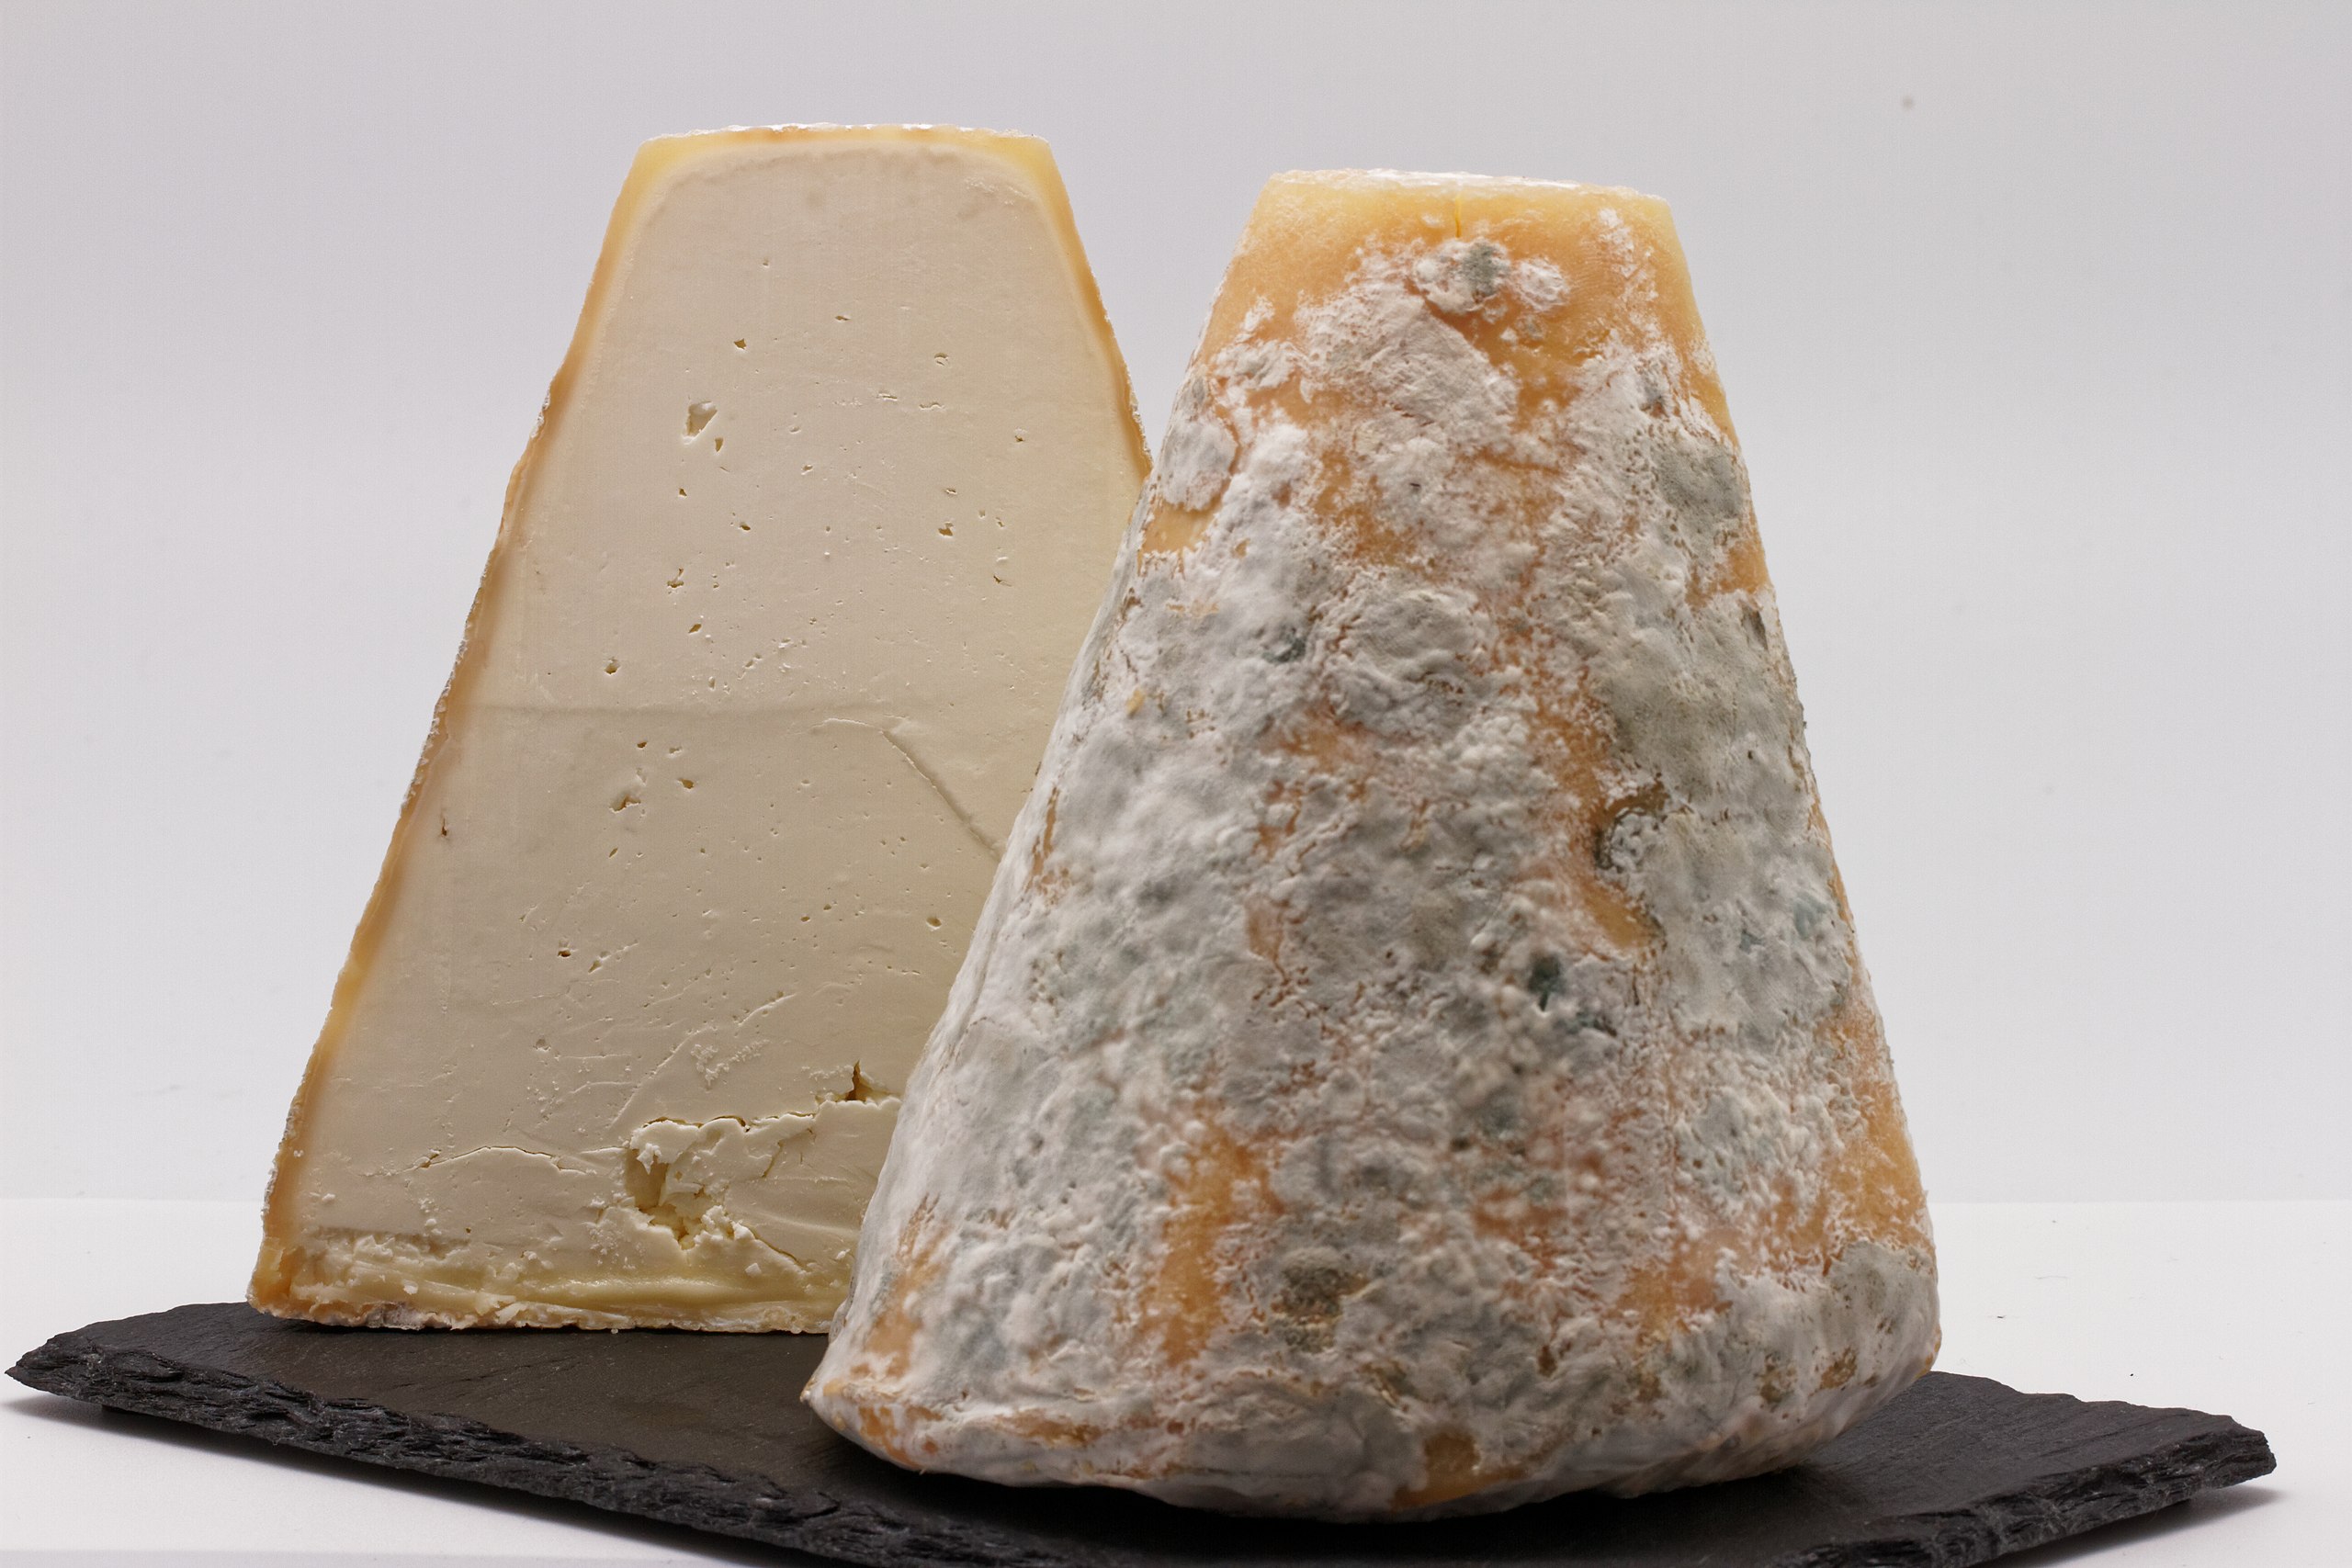 File:Fromage et charcuterie corse.jpg - Wikimedia Commons